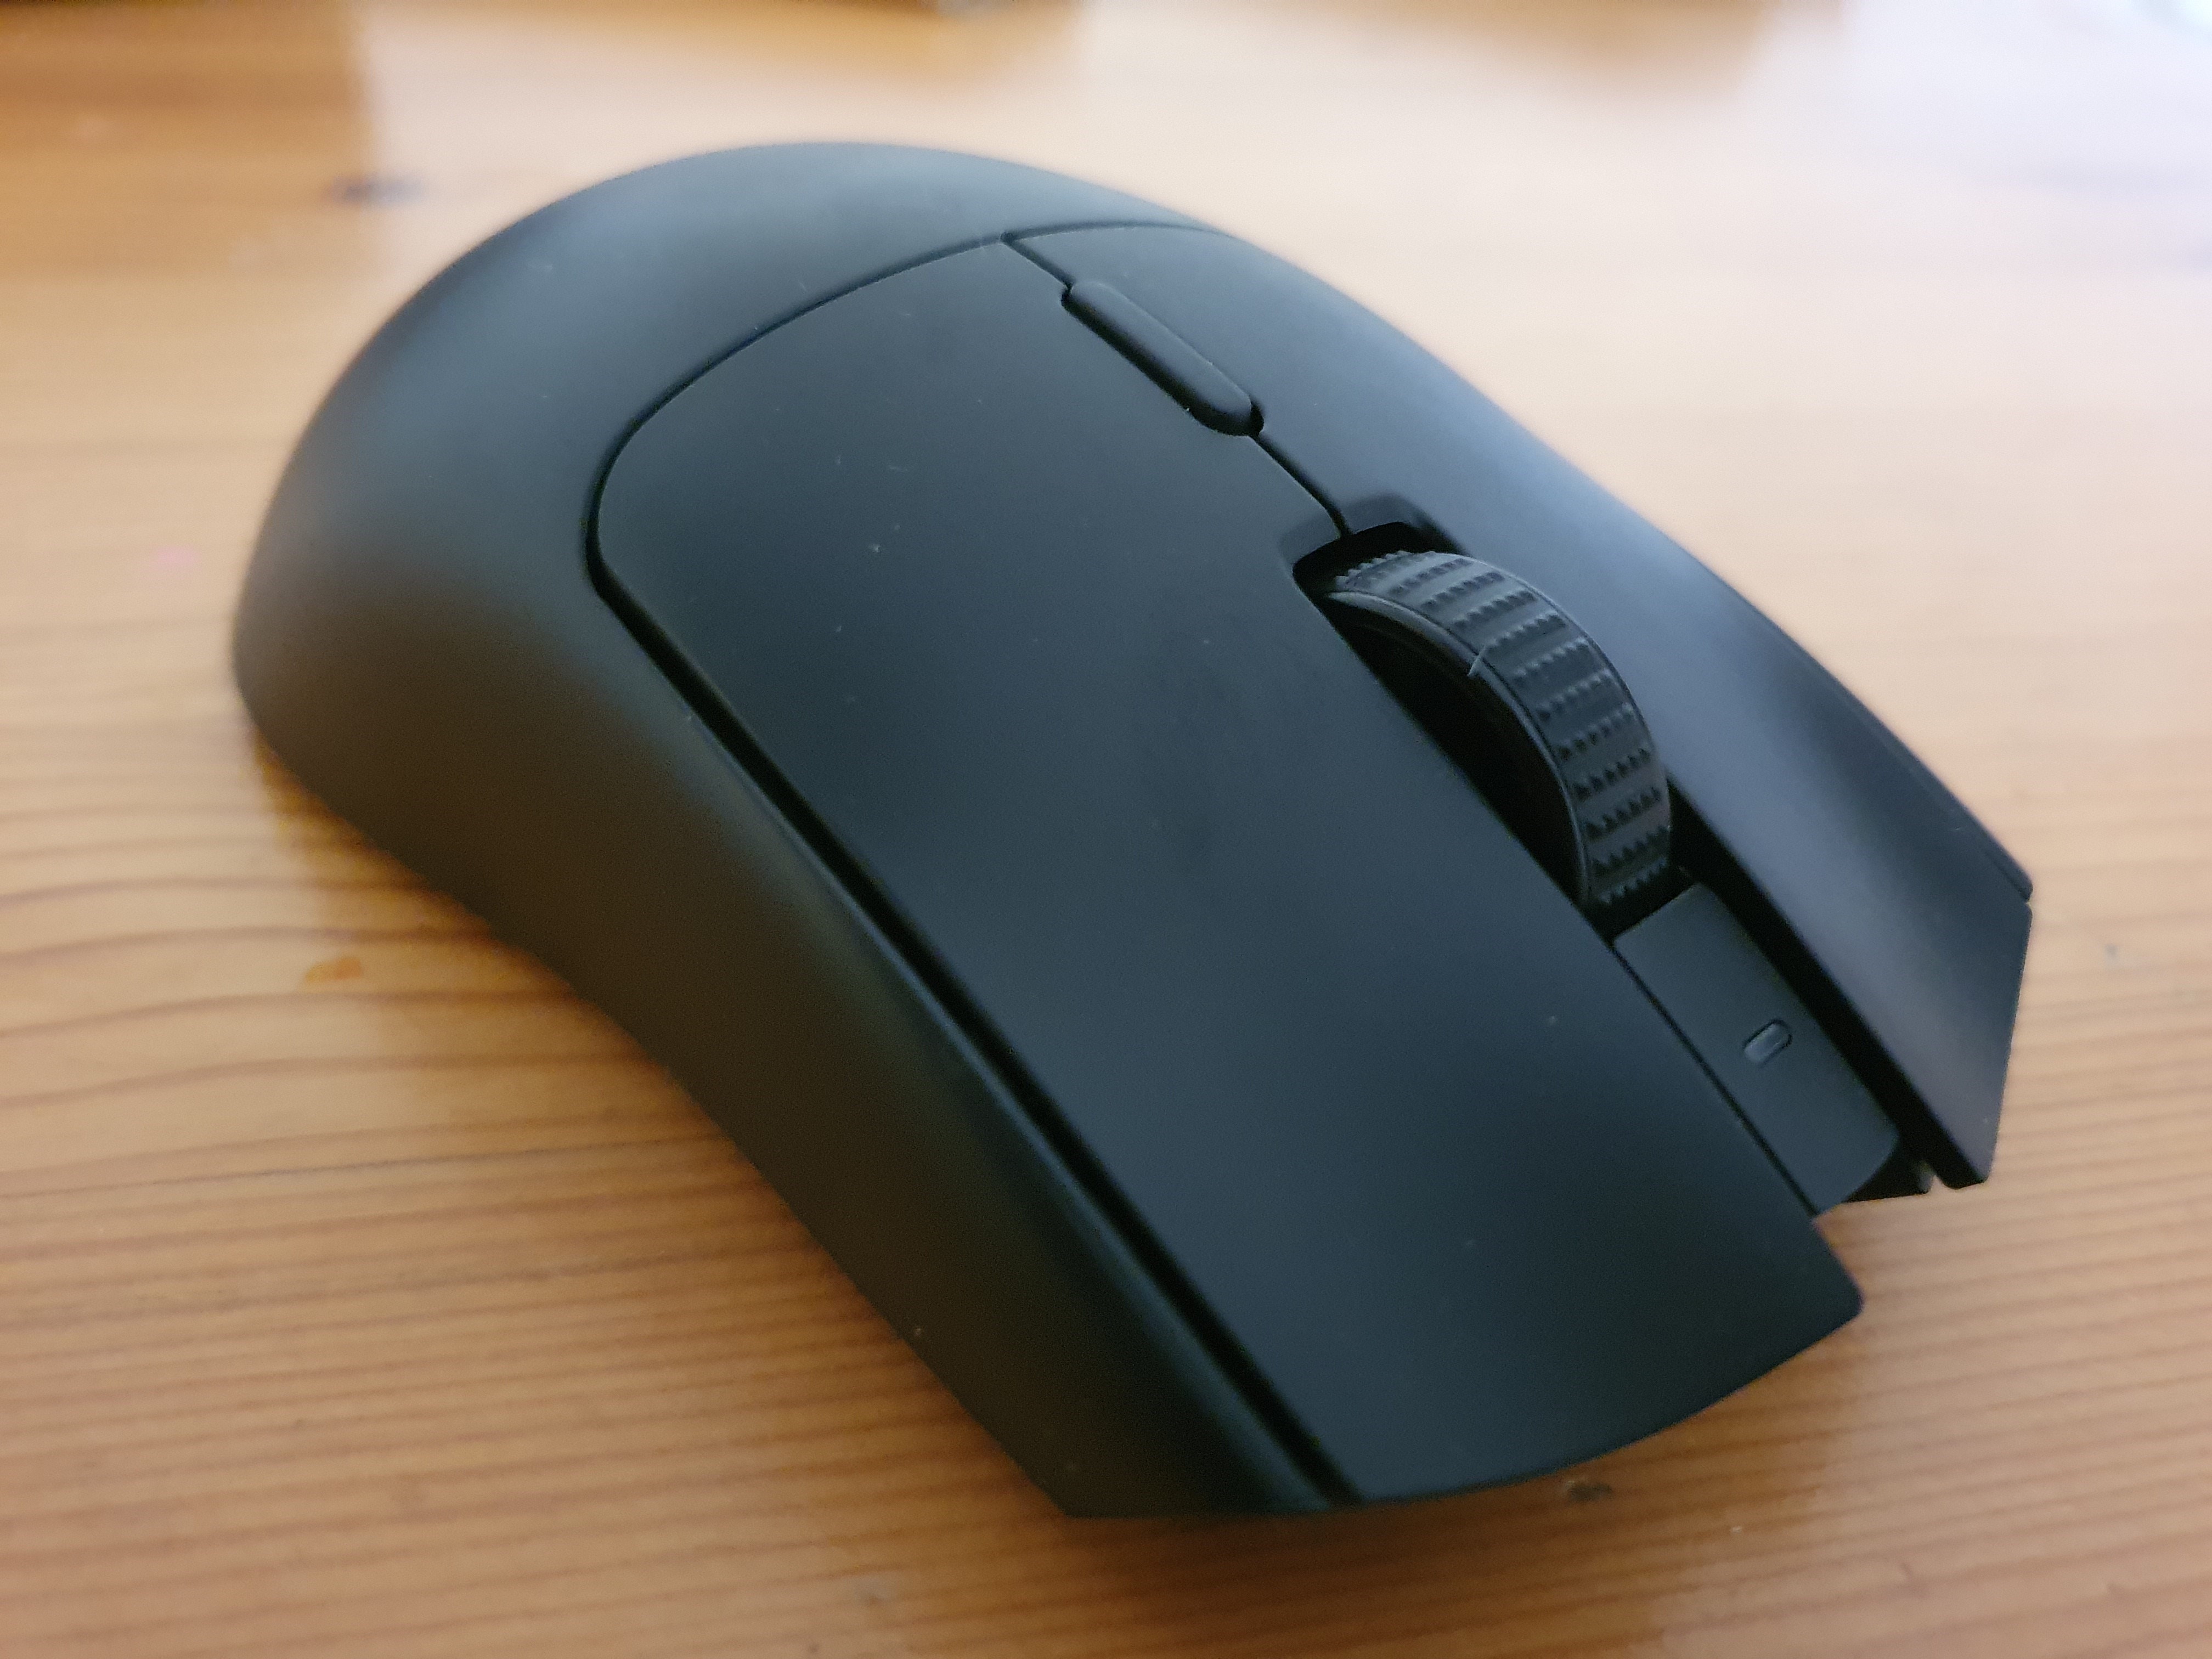 Razer Viper V3 Hyperspeed - Most sharp replaceable battery chance